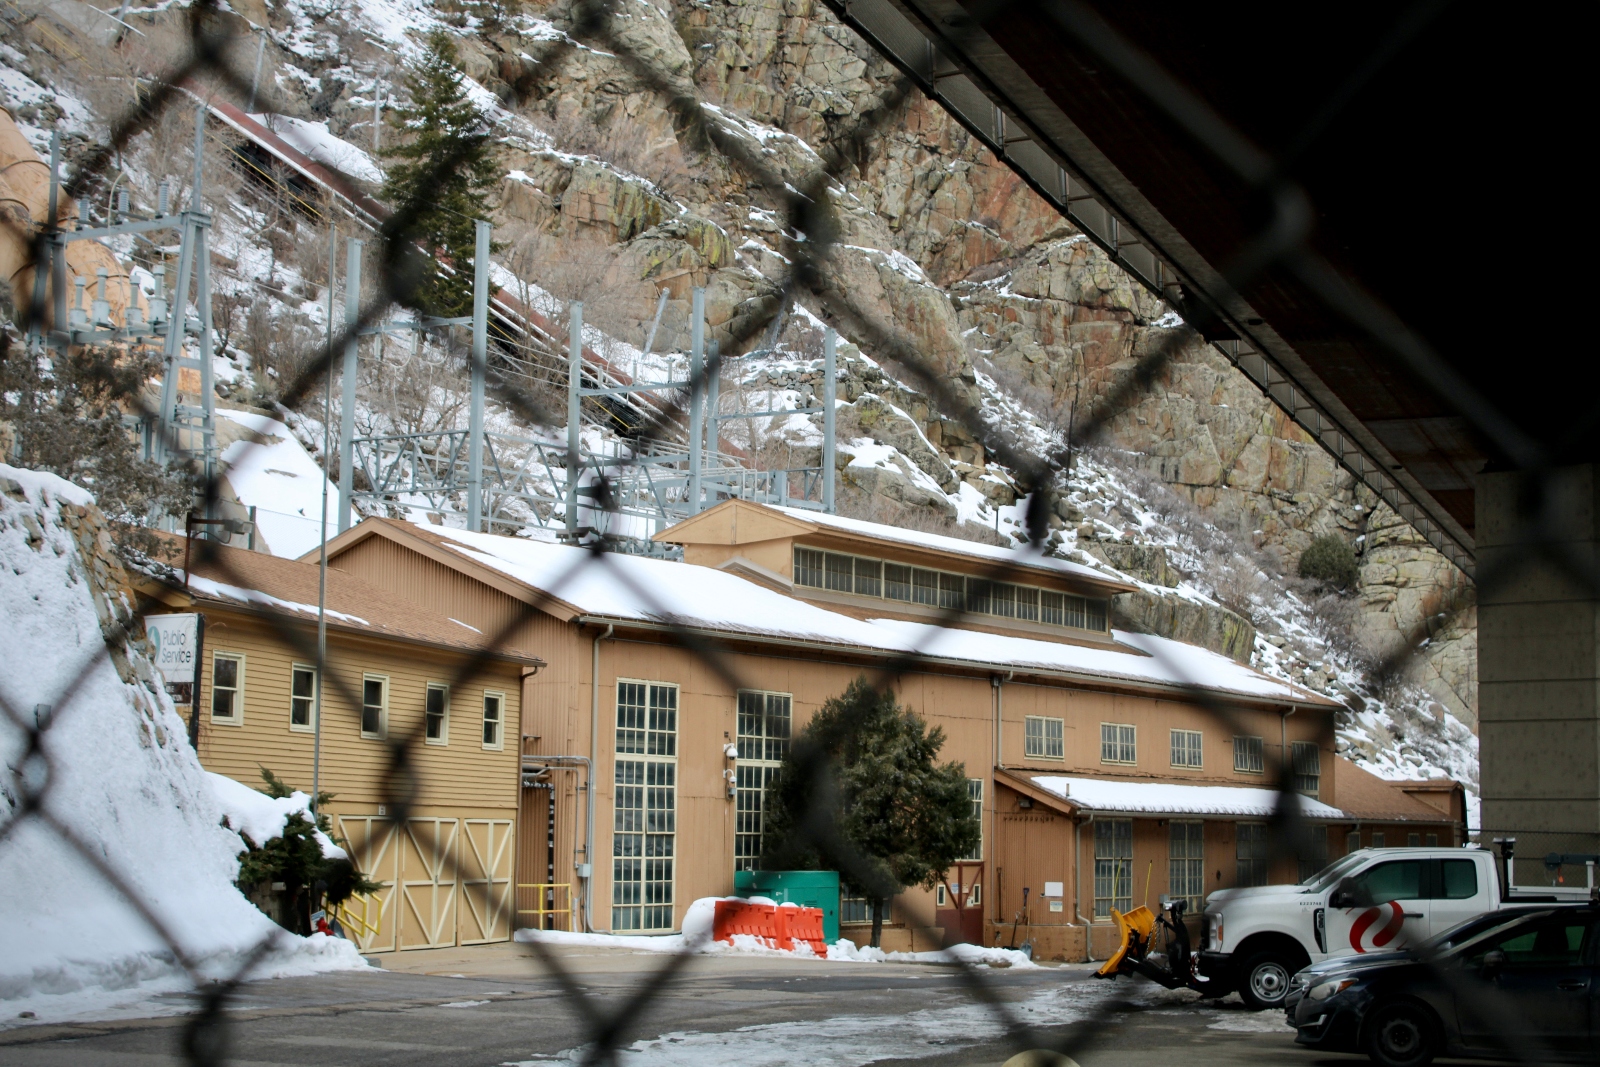 The view of a brown, snow-covered building through a chain link fence.